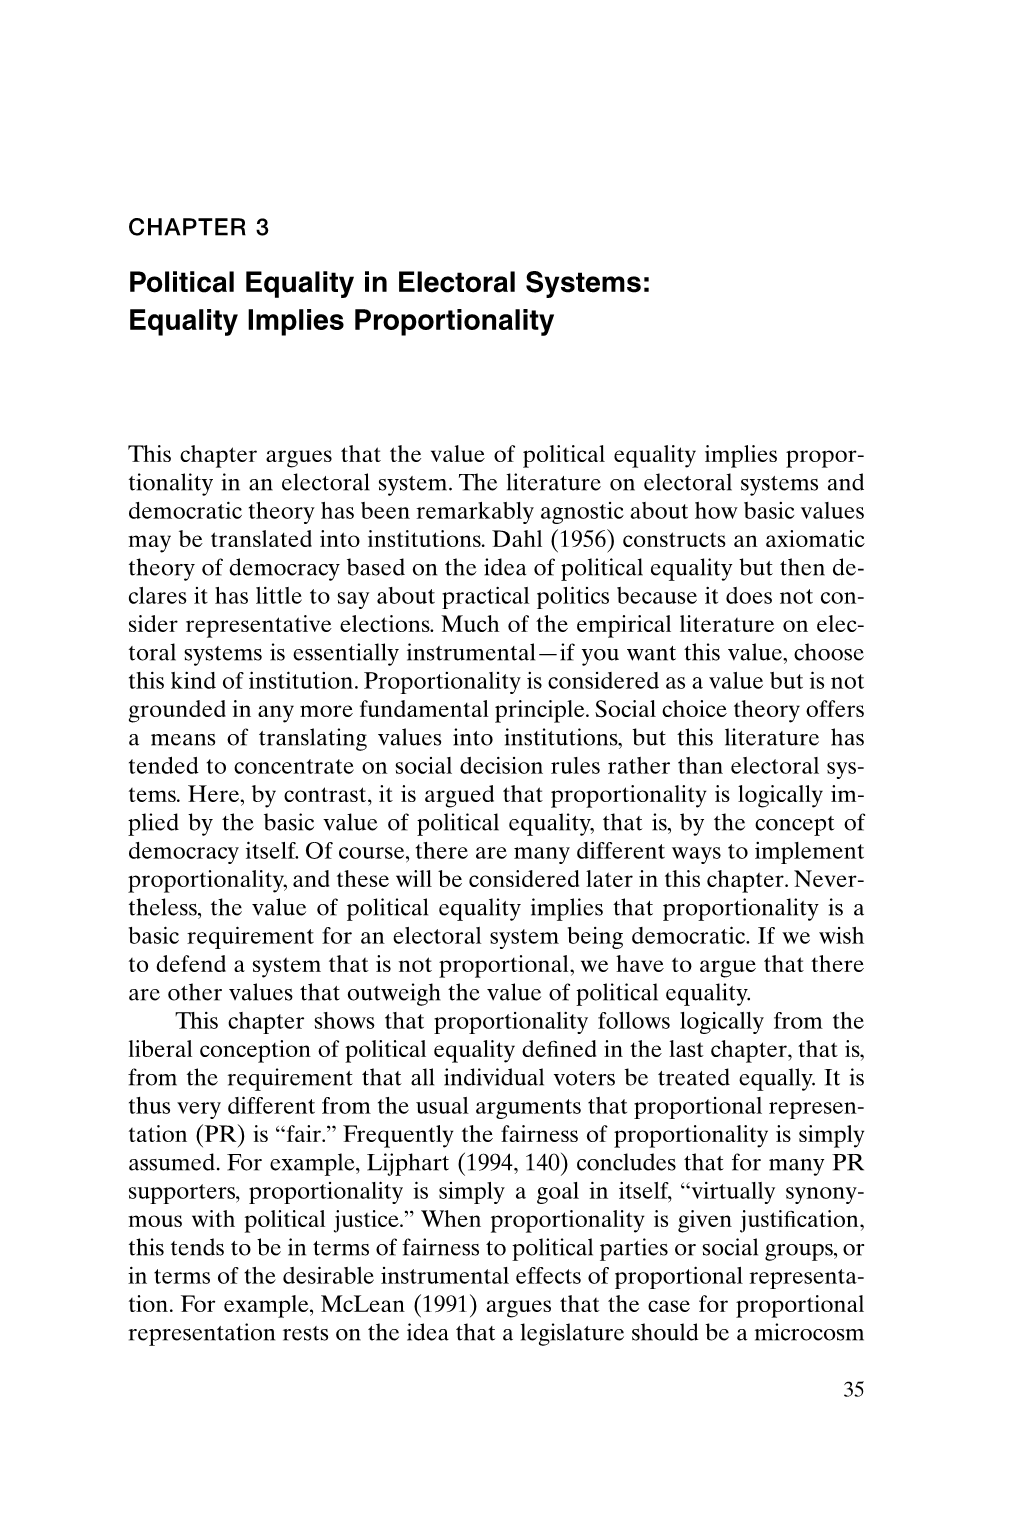 Political Equality in Electoral Systems: Equality Implies Proportionality